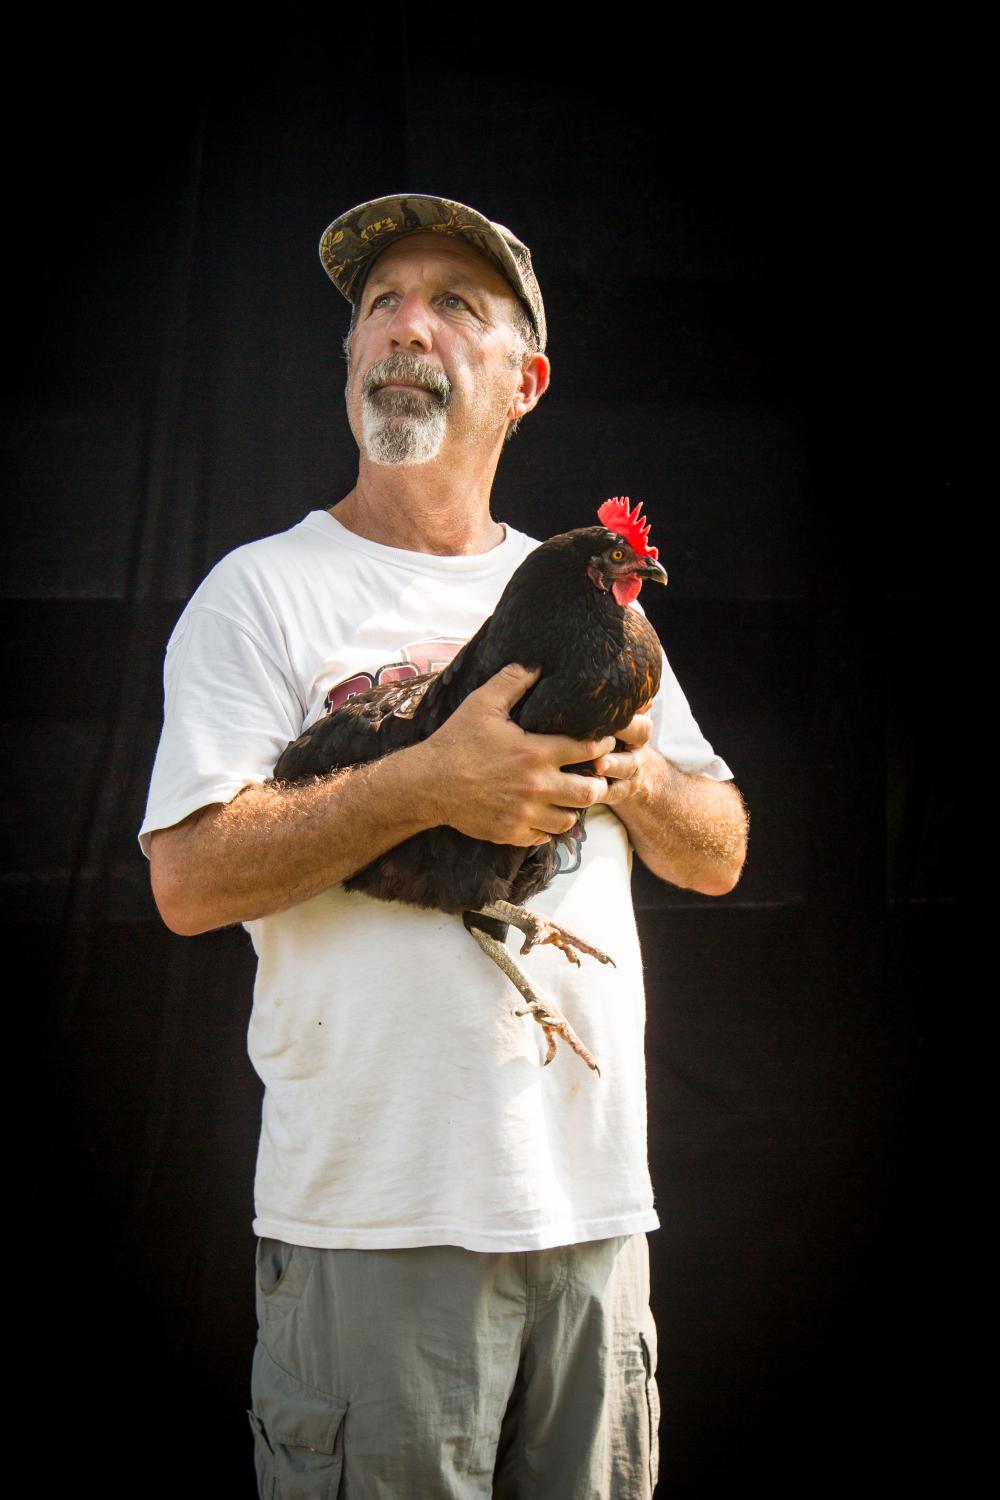 Oh, Farmer - Peter Treiber, owner of Treiber Farms, Southold, NY